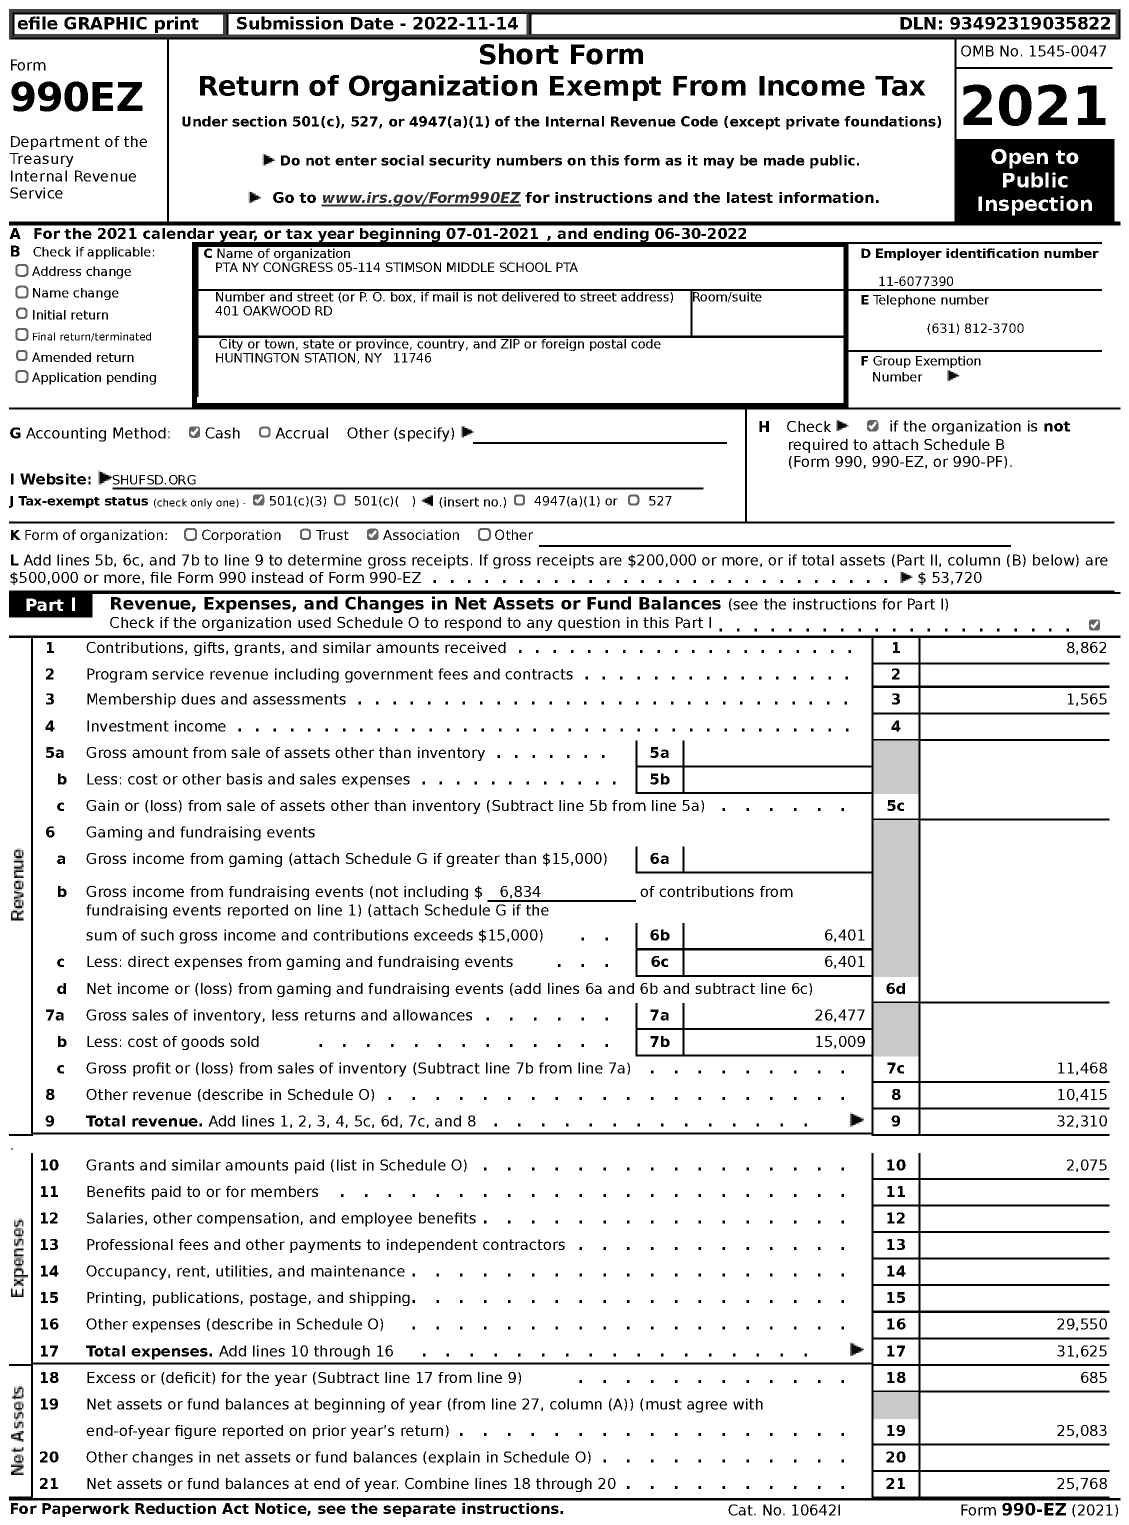 Image of first page of 2021 Form 990EZ for New York State PTA - 05-114 Stimson Middle School PTA